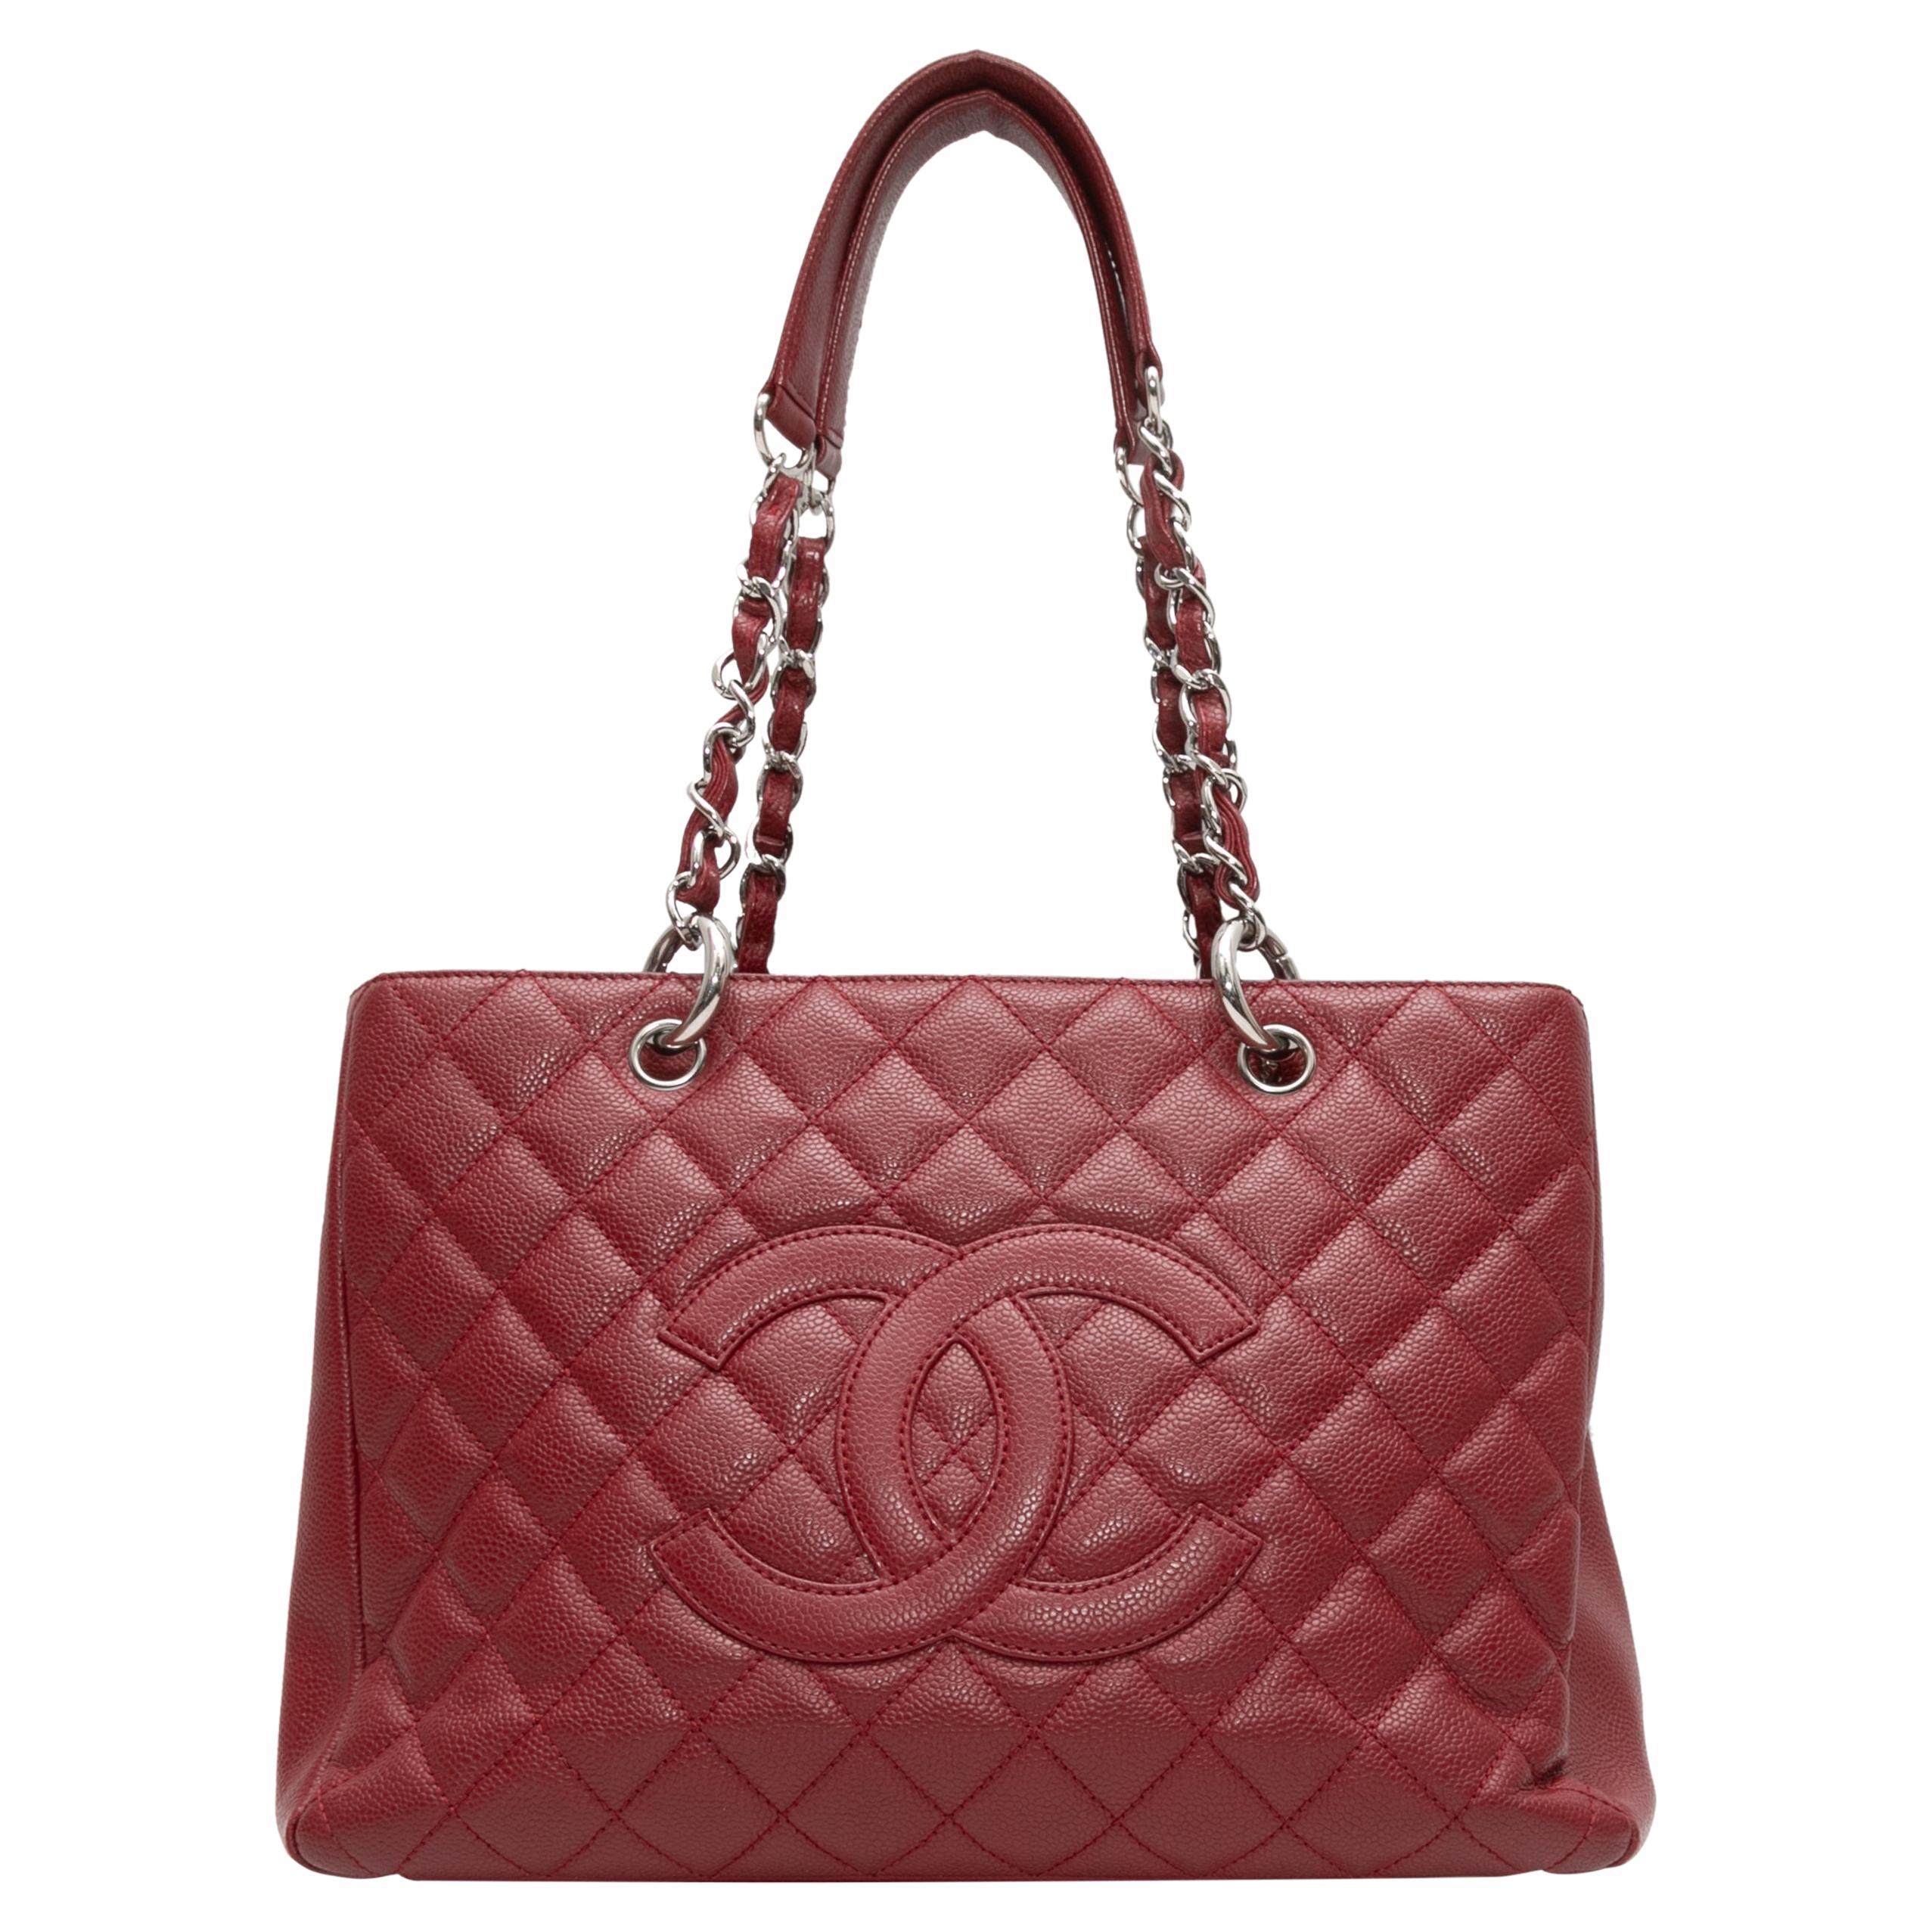 Red Chanel Caviar Leather Grand Shopping Tote